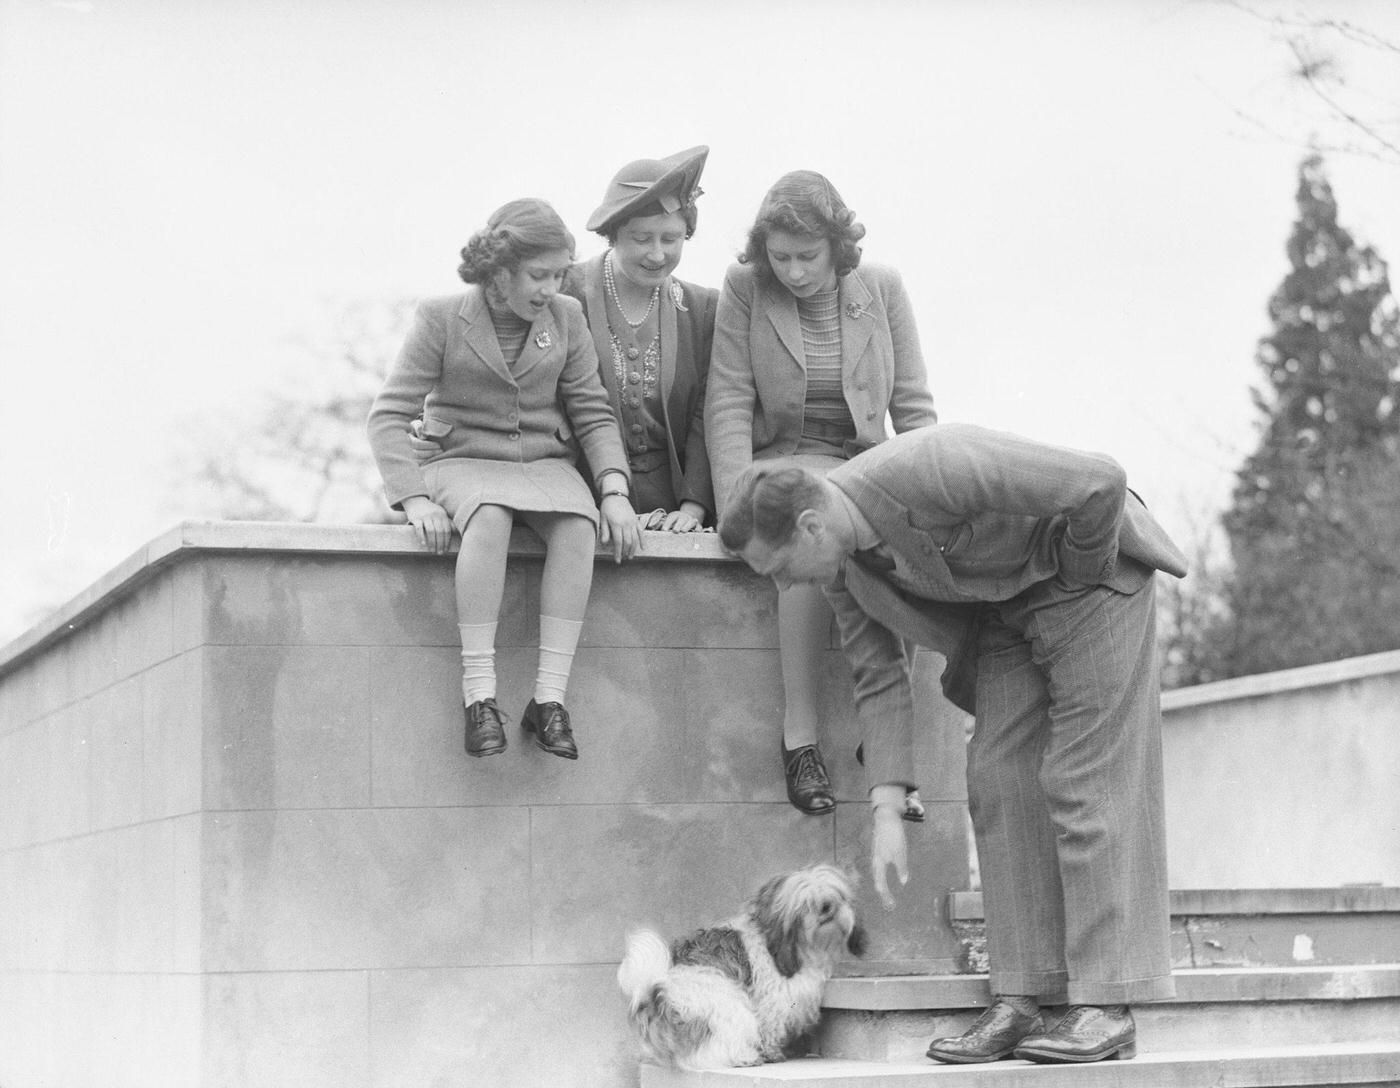 King George VI pets a dog while the Queen Elizabeth, Princess Elizabeth and Princess Margaret look on at the Royal Lodge in Windsor Castle, England on April 11, 1942.